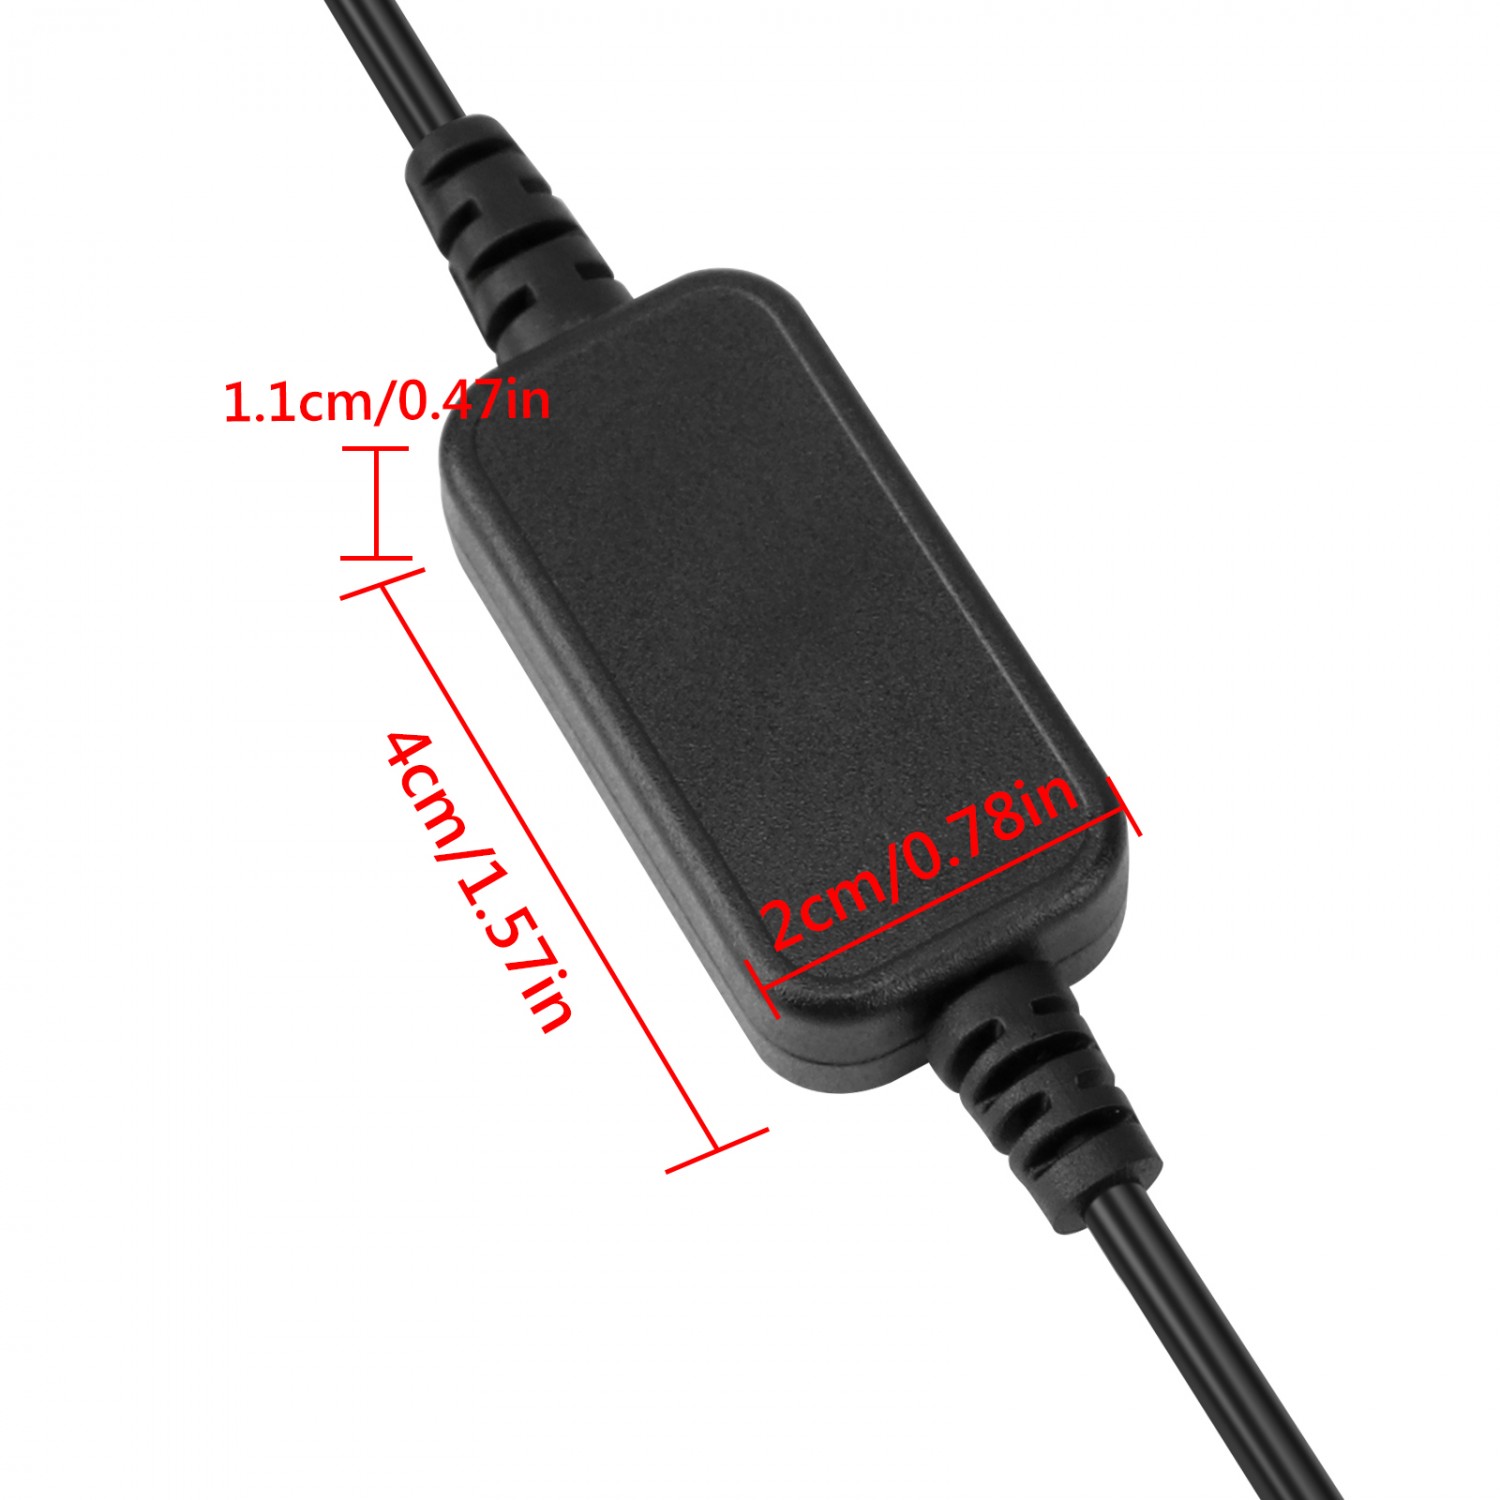 USB Cable Power Boost Line DC 5V to DC 12V Step UP